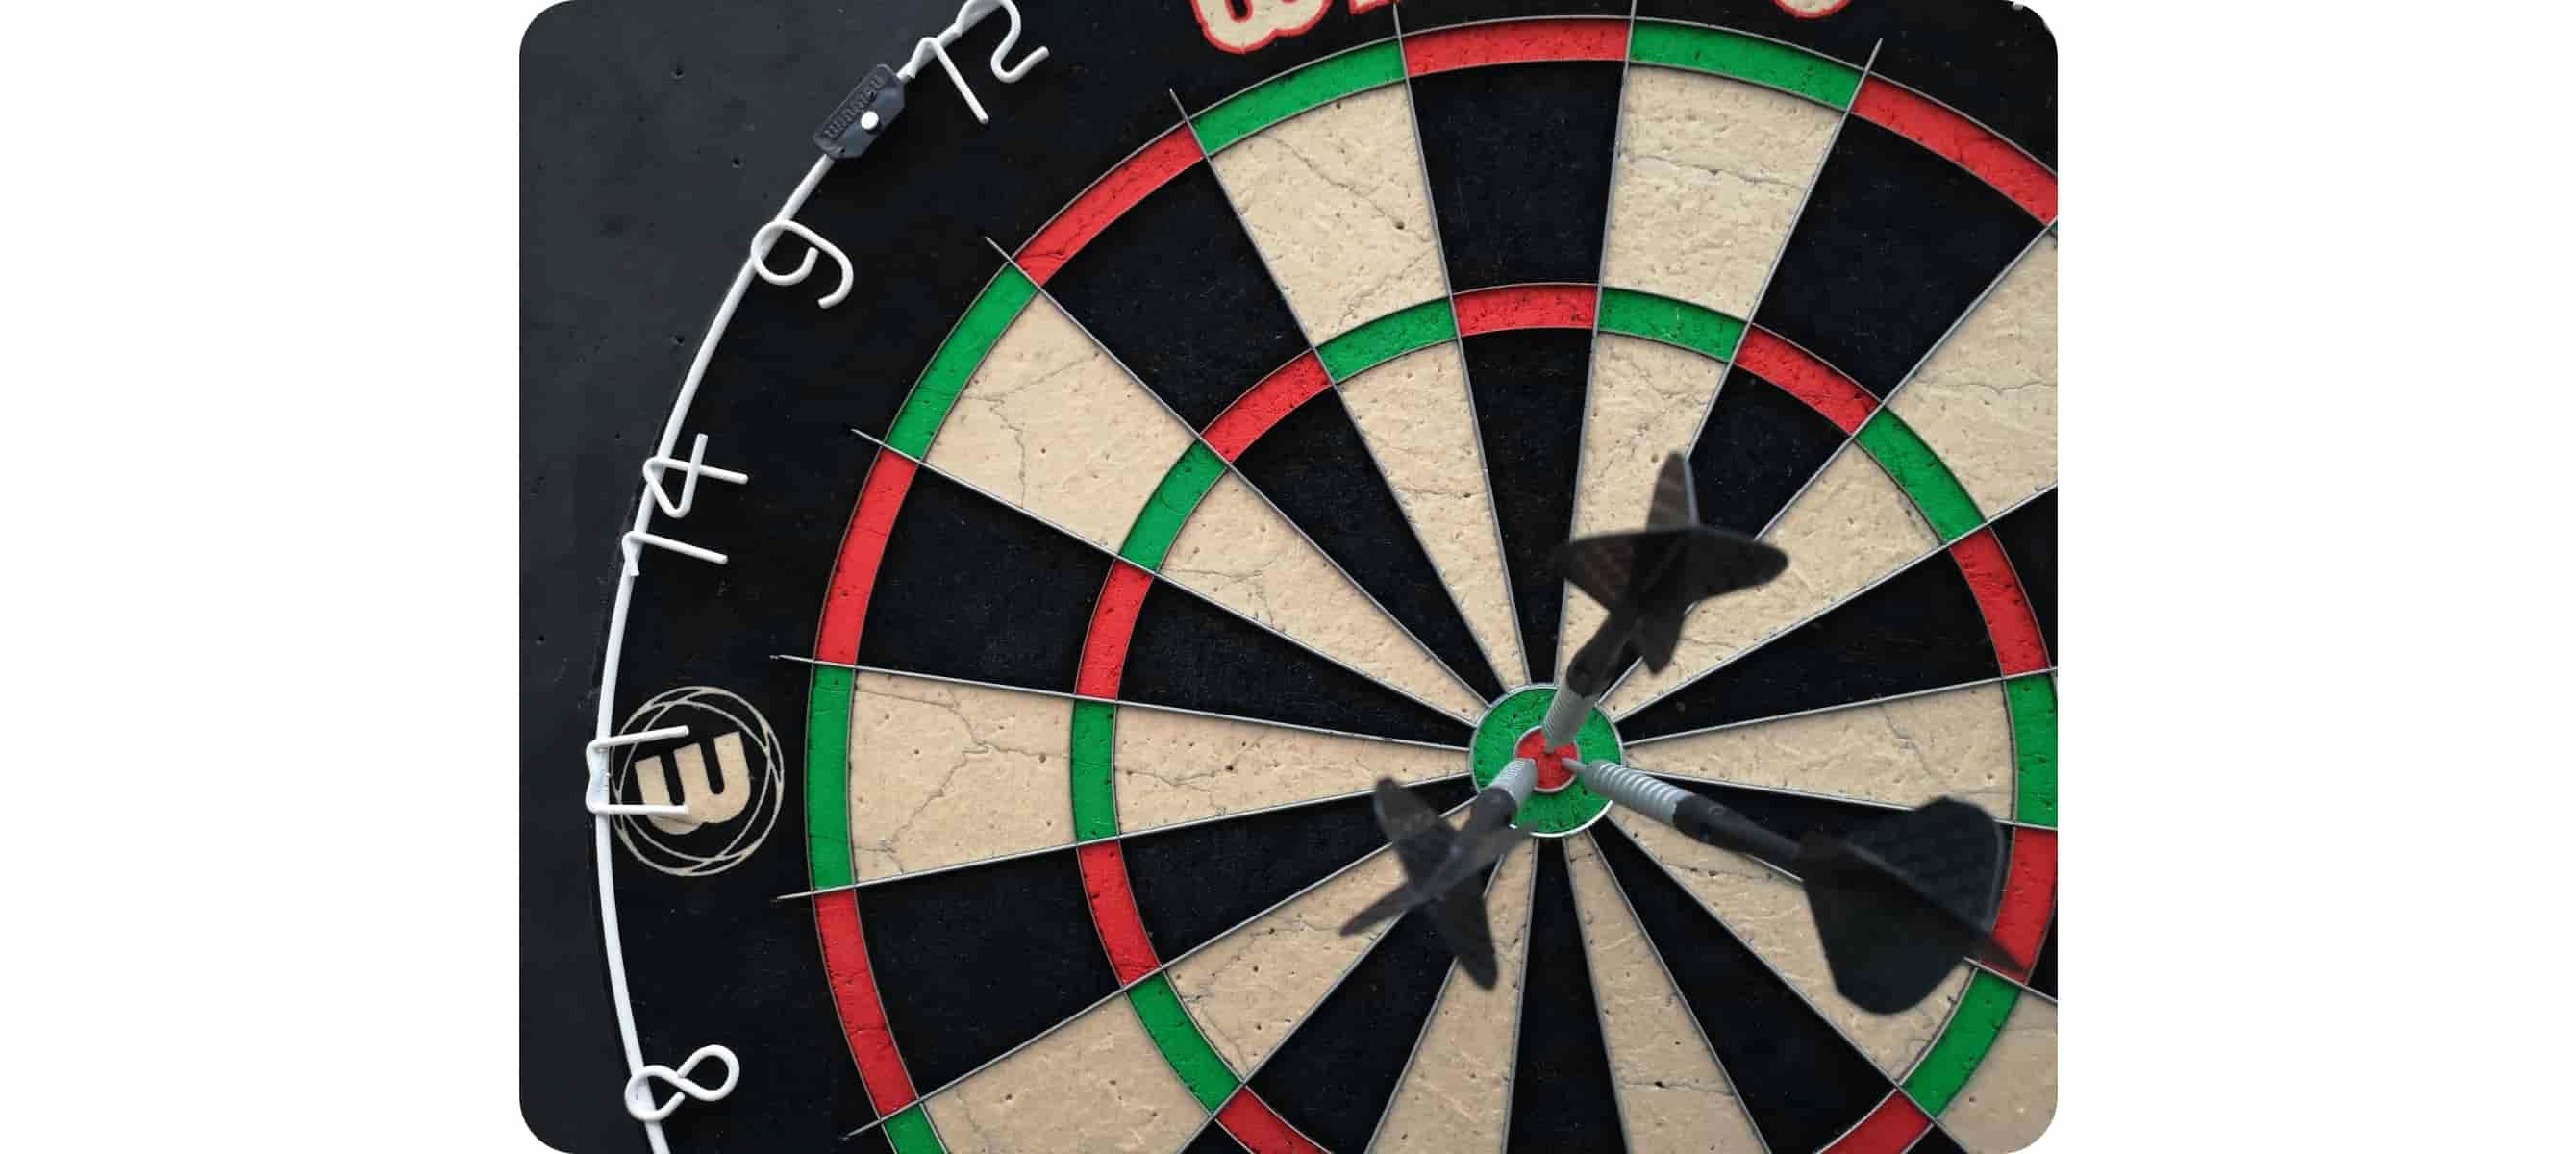 A close-up shot of a dartboard with darts on the bullseye